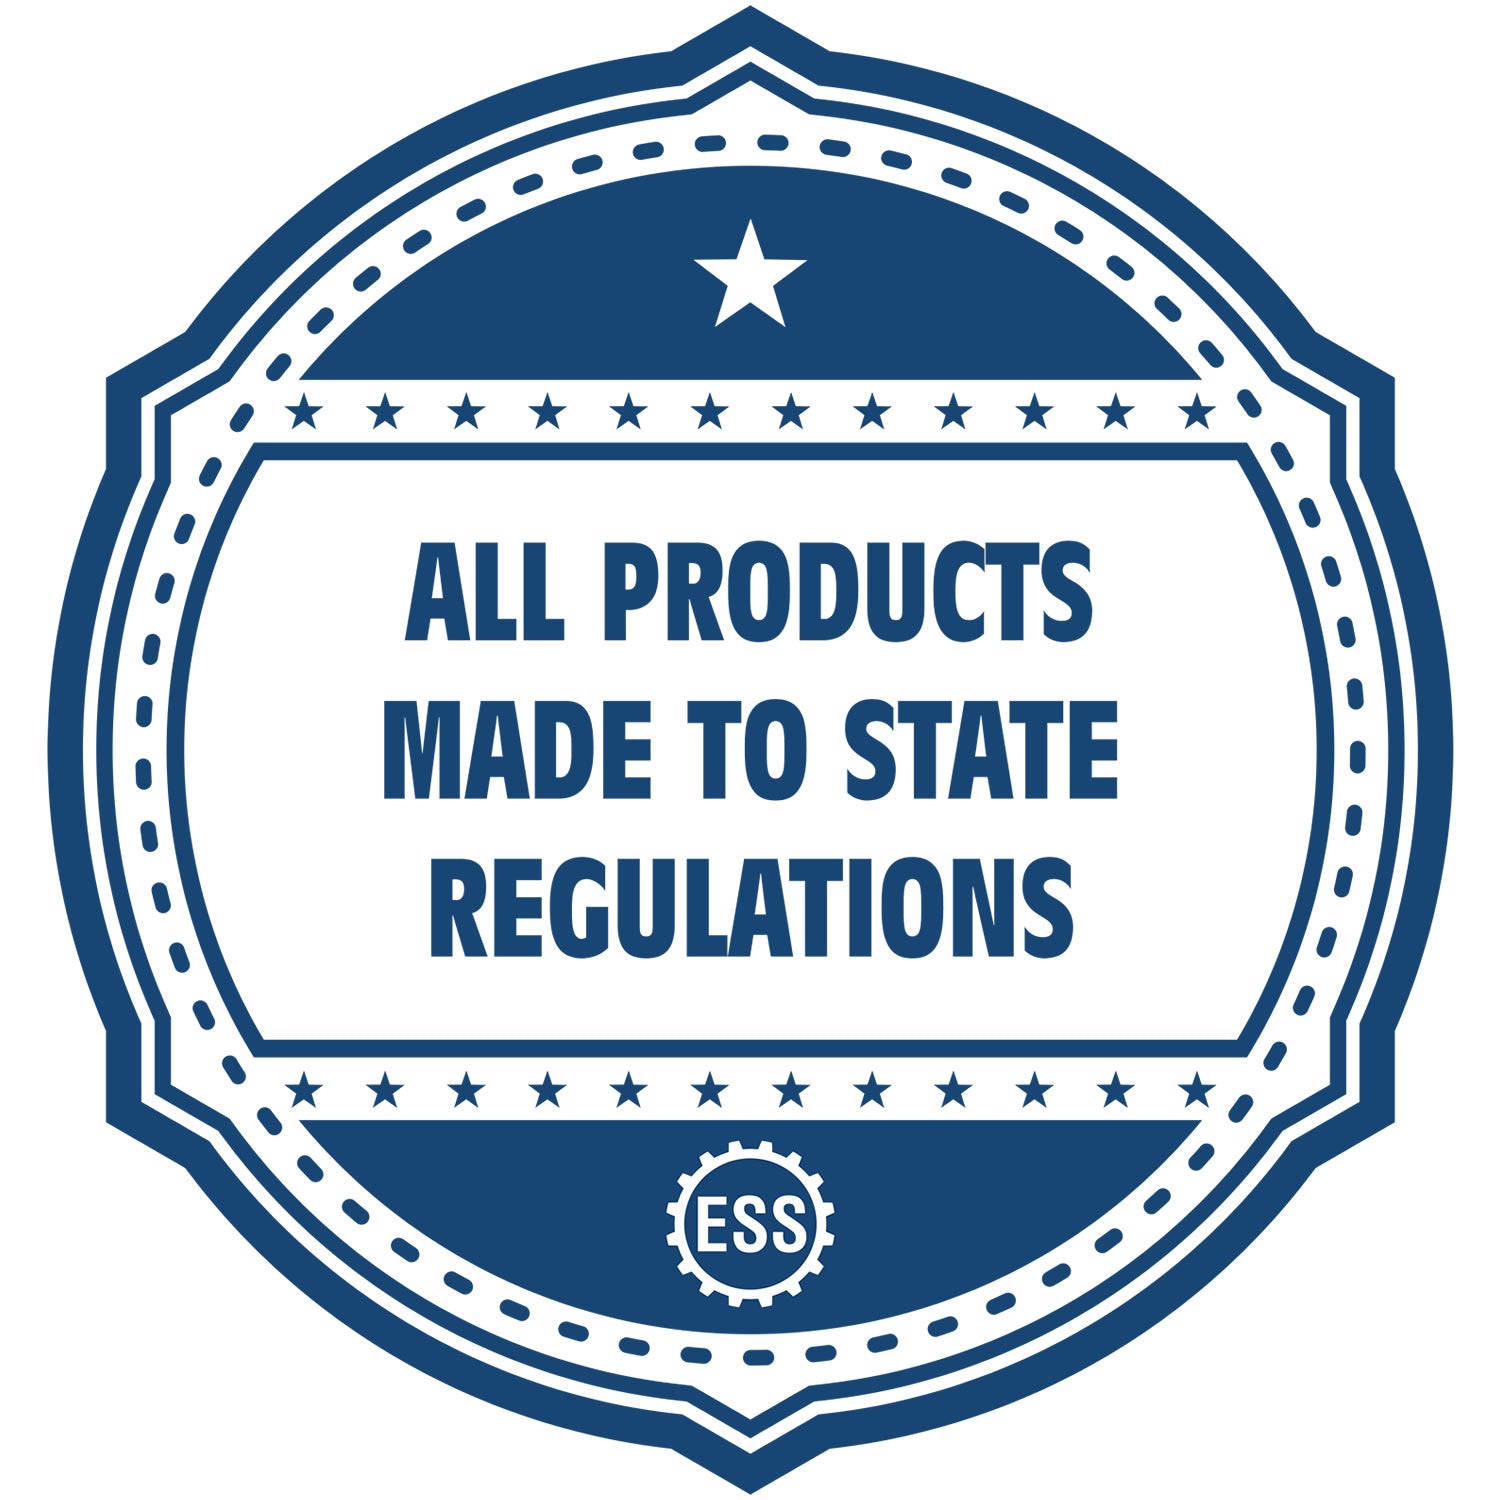 An icon or badge element for the Nevada Professional Engineer Seal Stamp showing that this product is made in compliance with state regulations.